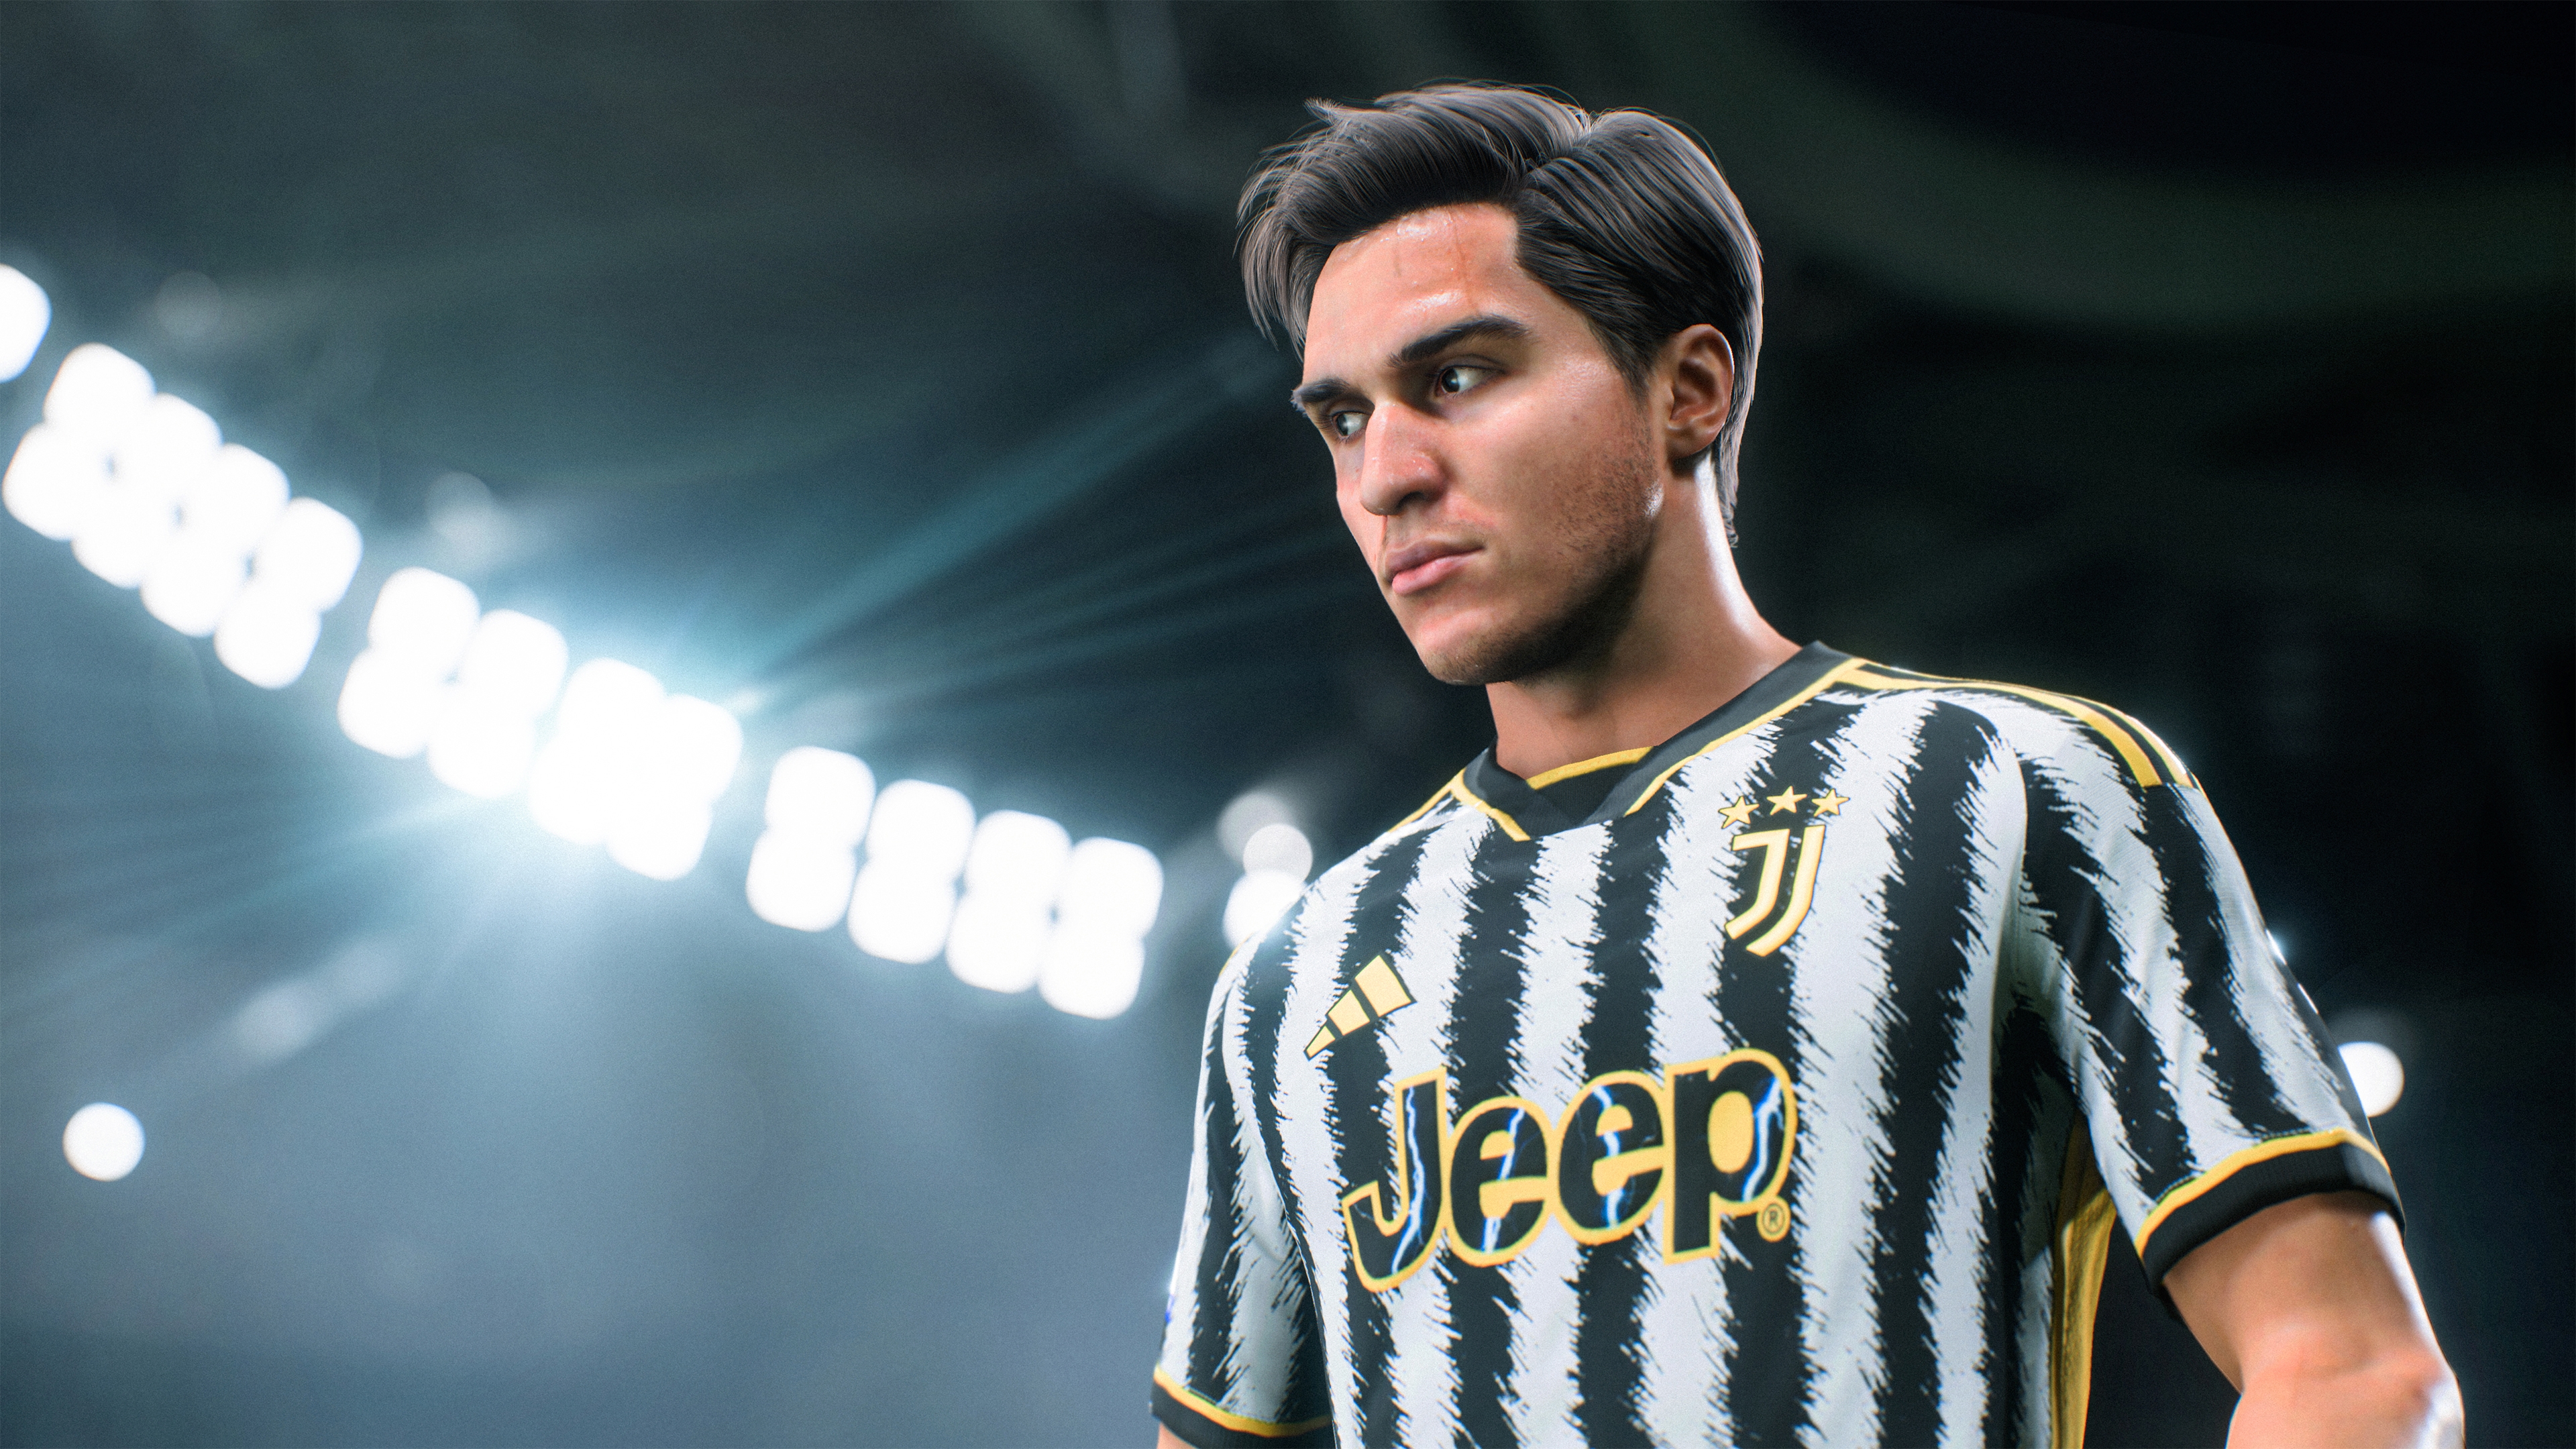 EA Sports FC 24: All the latest news on EA's first post-FIFA soccer title -  The Verge